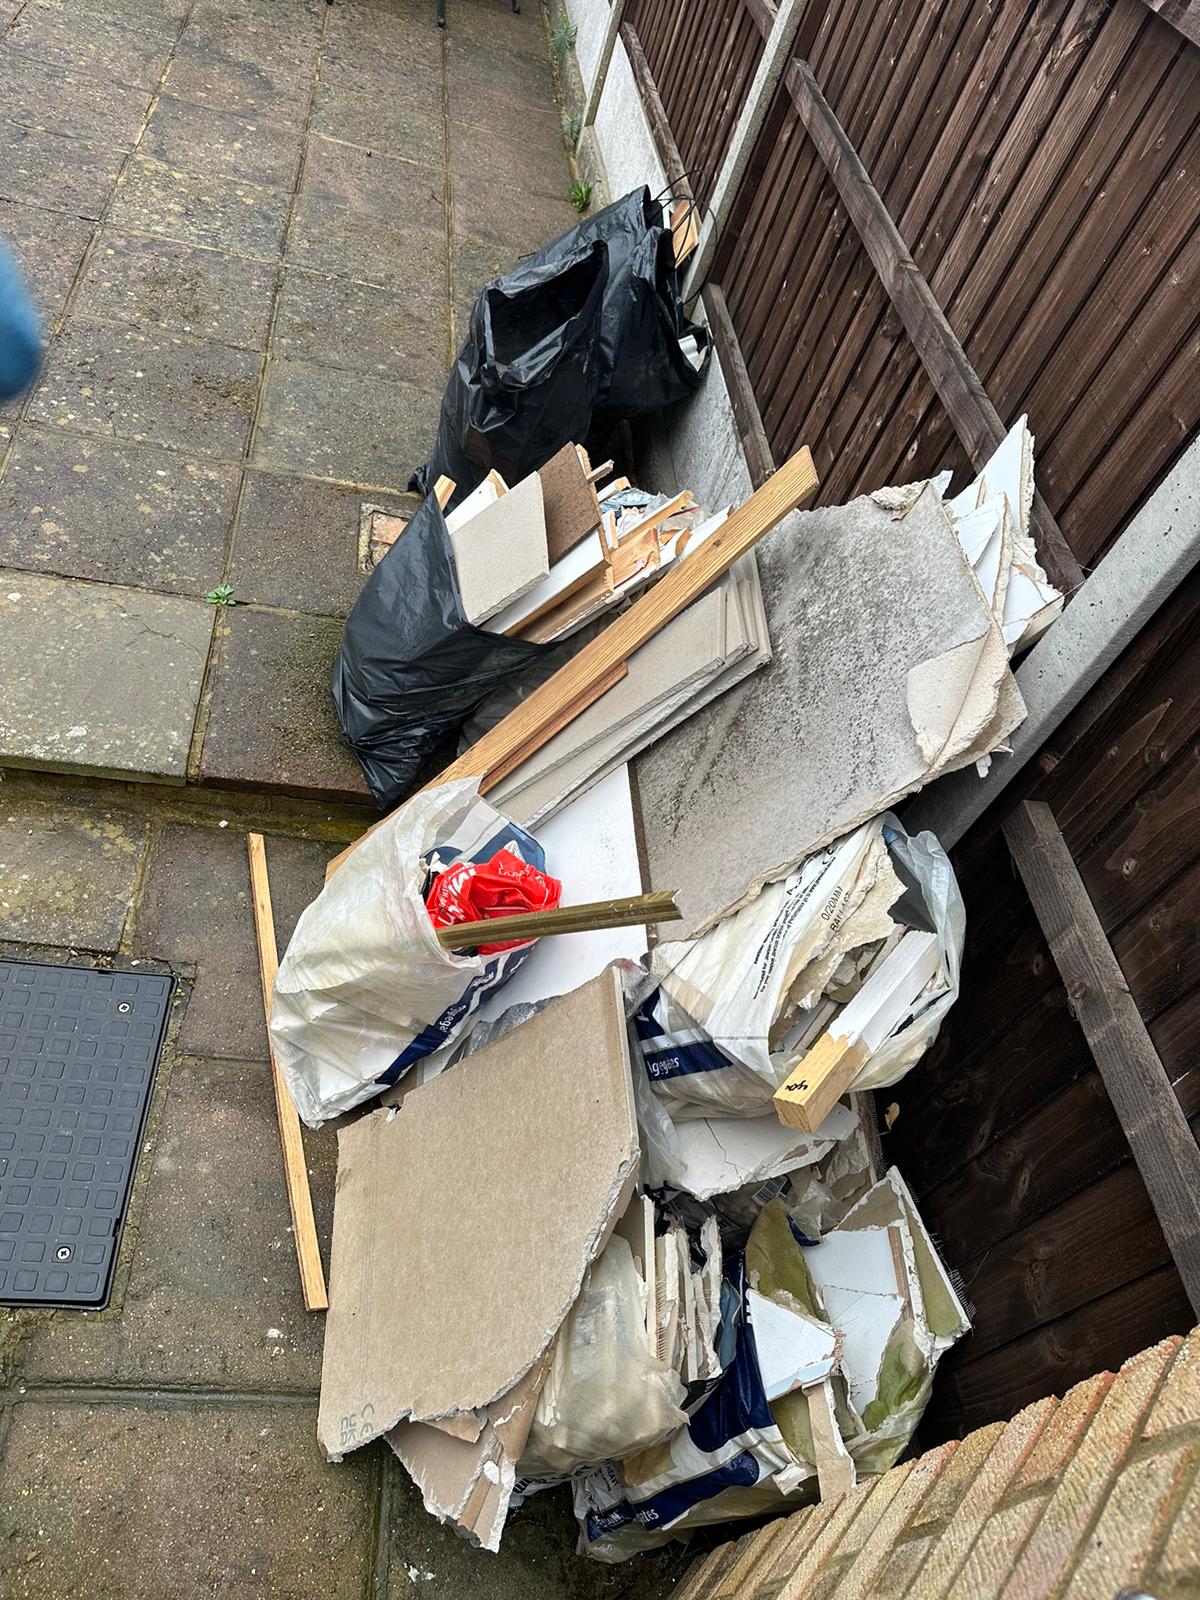 Looking for the best local rubbish removal experts in London and Surrey? EnviRecycle Ltd are here to remove and recycle you waste